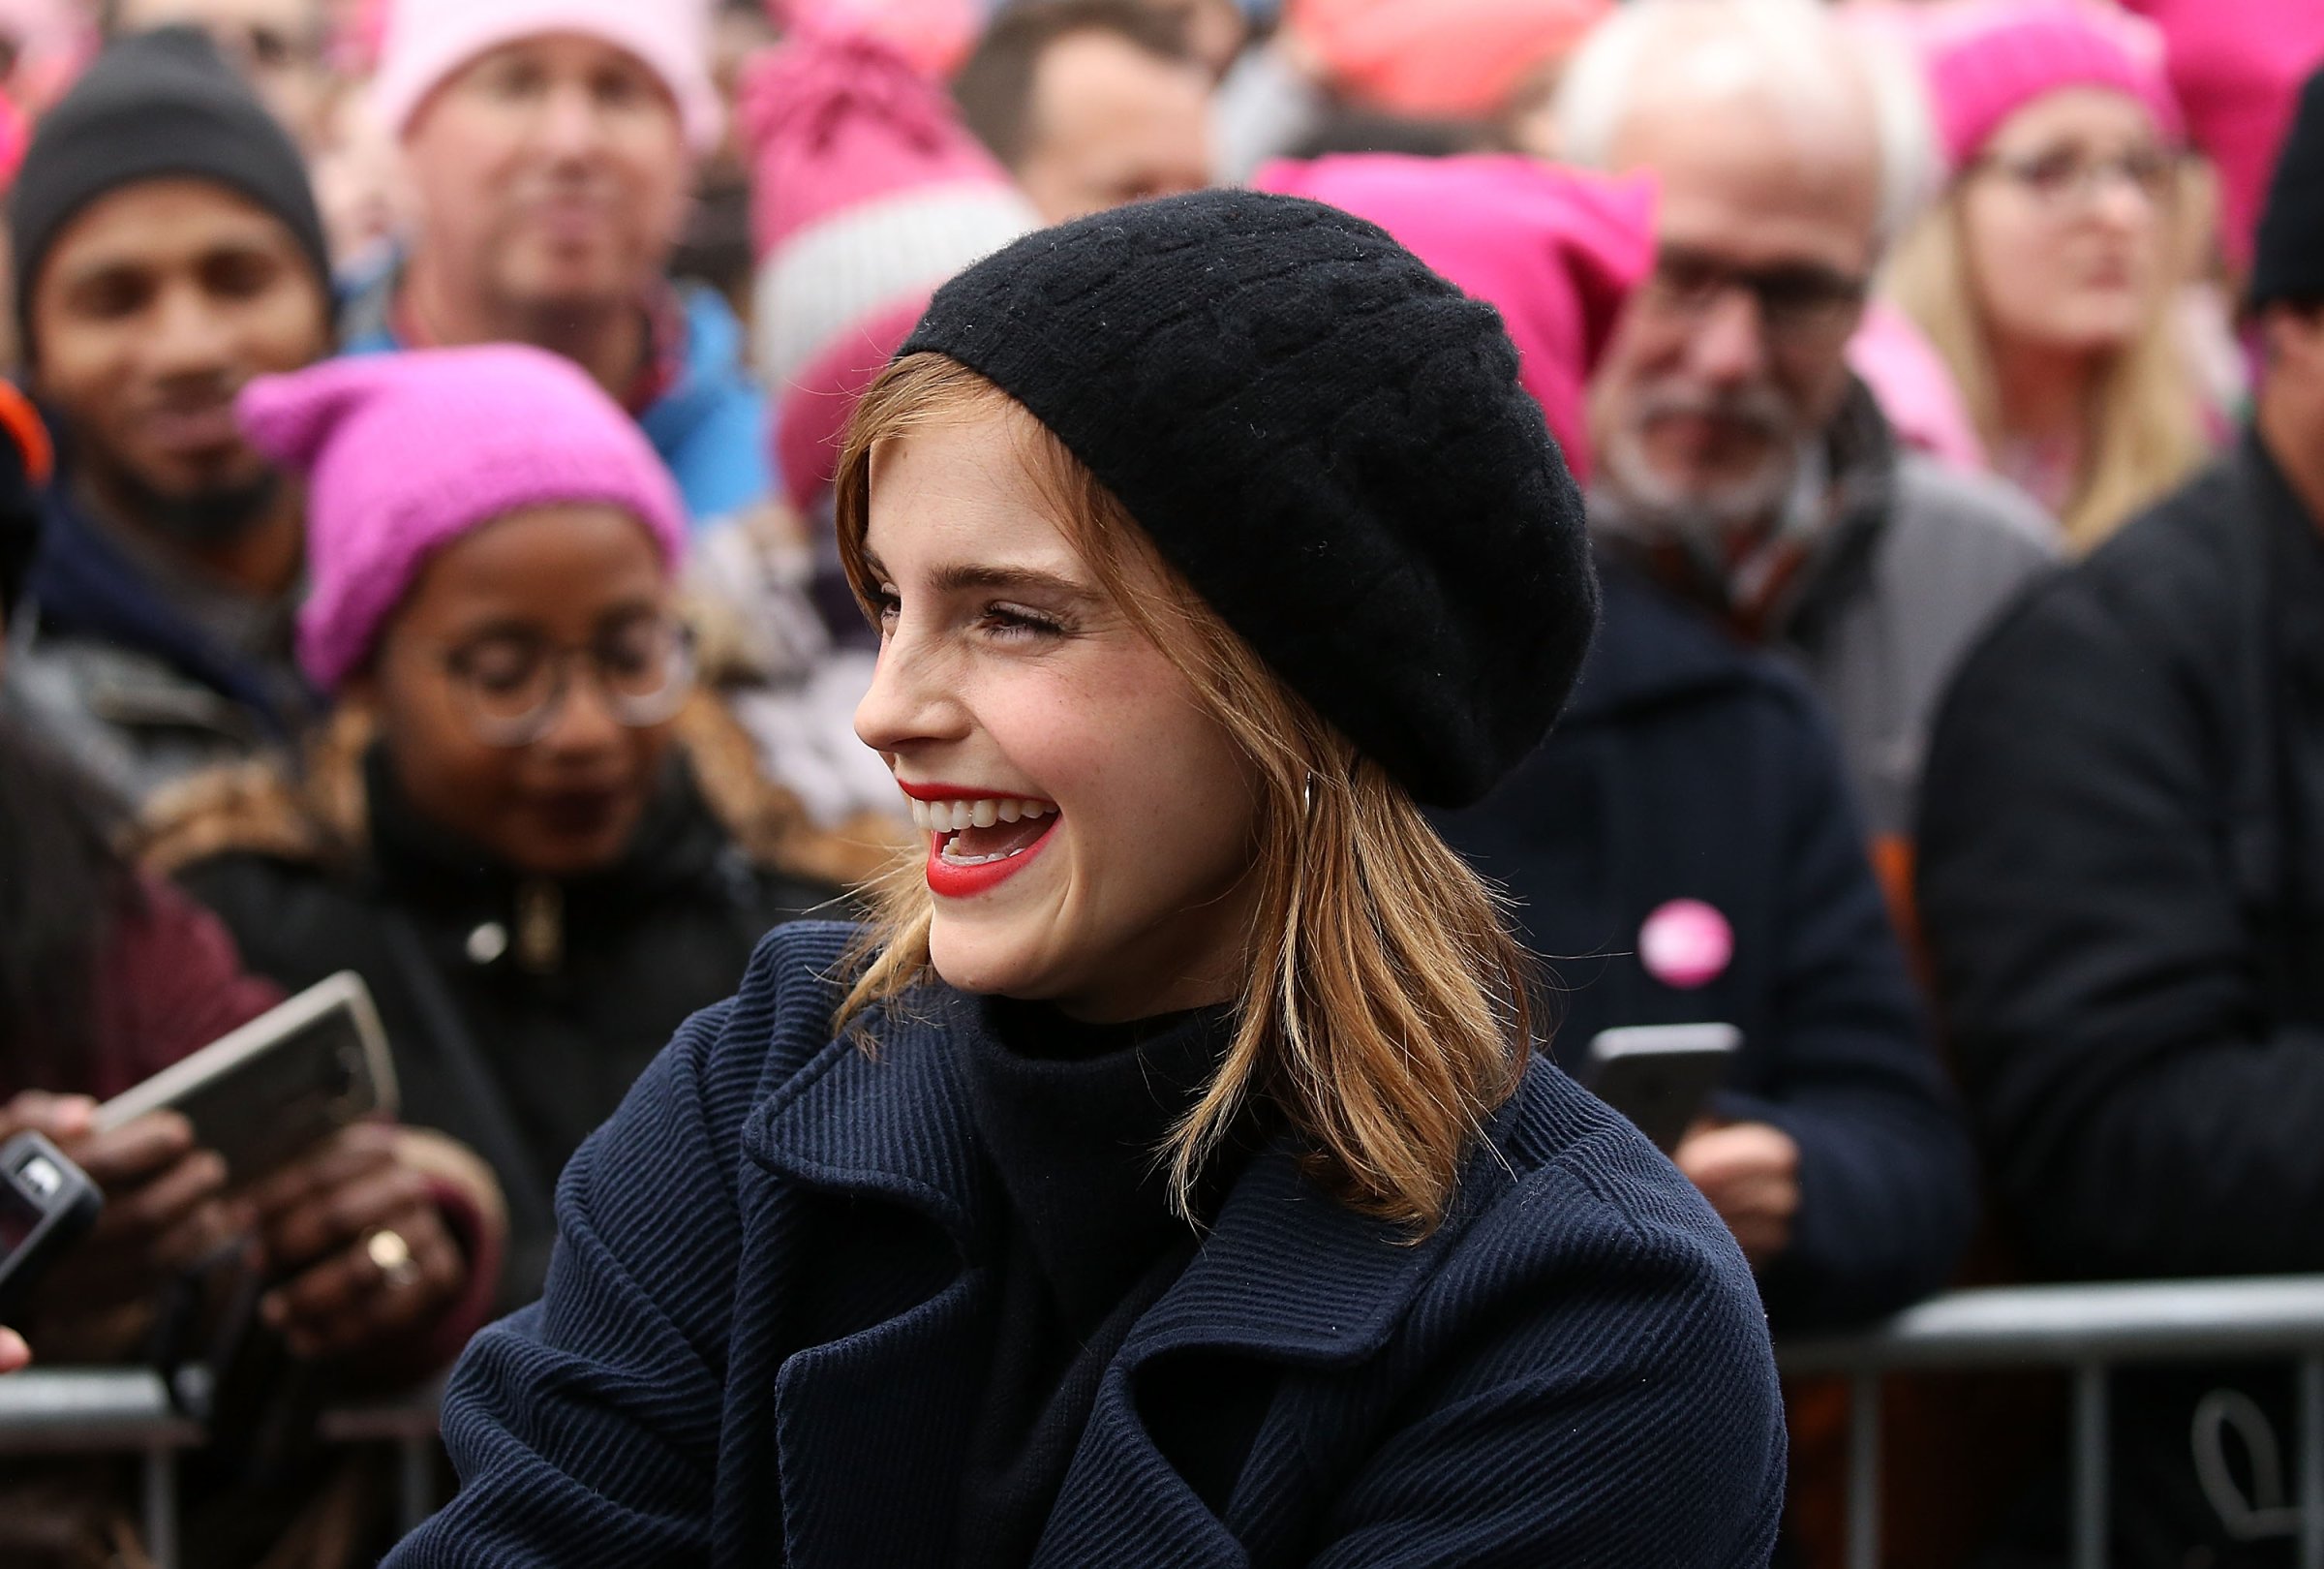 Emma Watson attends the rally at the Women's March on Washington on January 21, 2017 in Washington, DC.